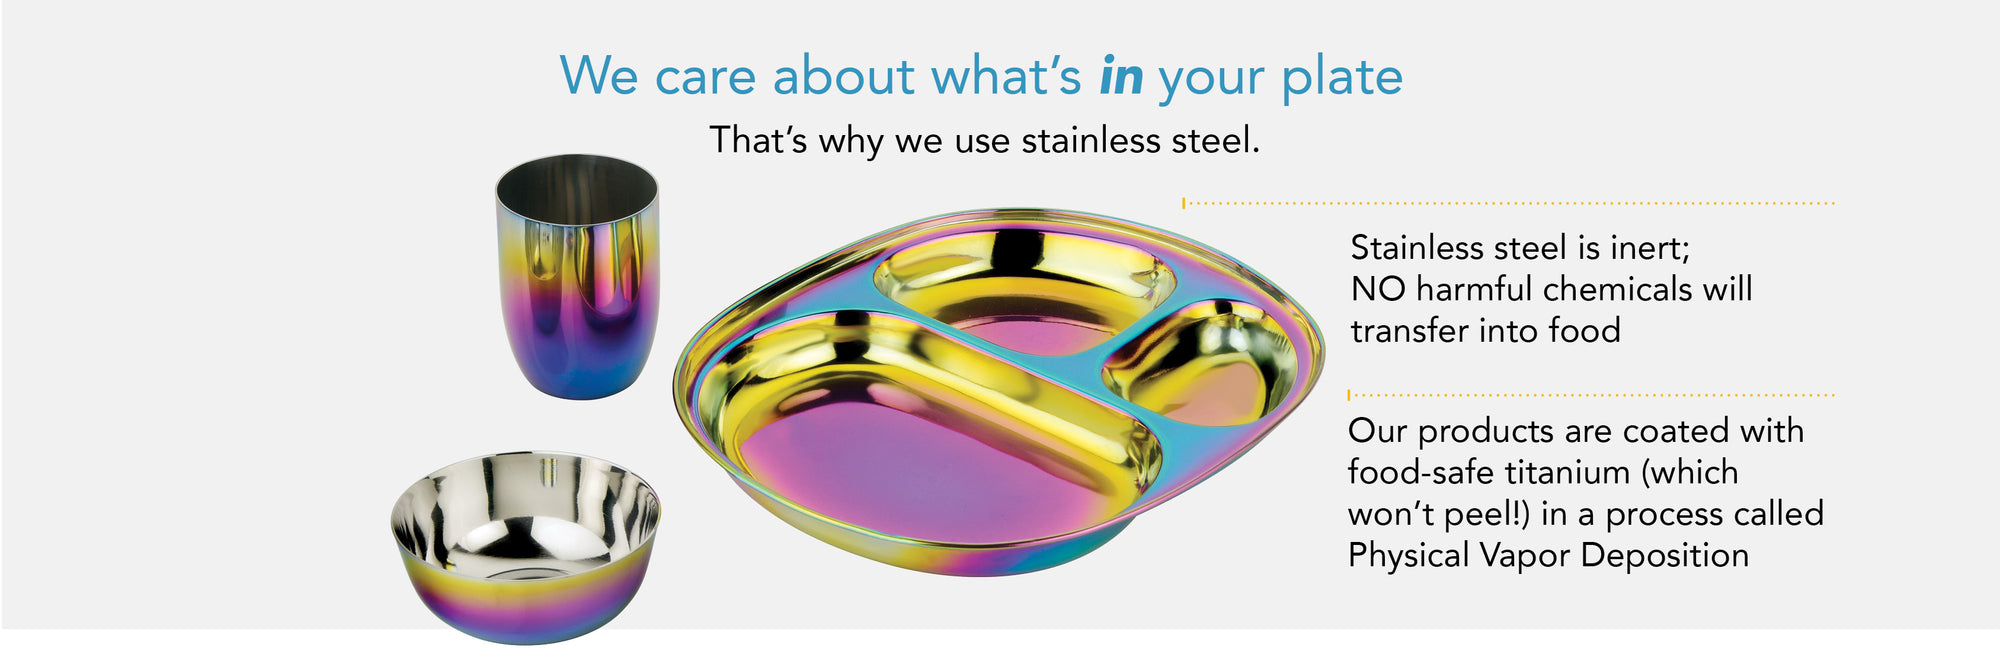 We care about what's in your plate. That's why we use stainless steel. Stainless steel is inert - that means no harmful chemicals transfer into your child's food. Our products are coated with food-safe titanium (which won't peel) in a process called PVD